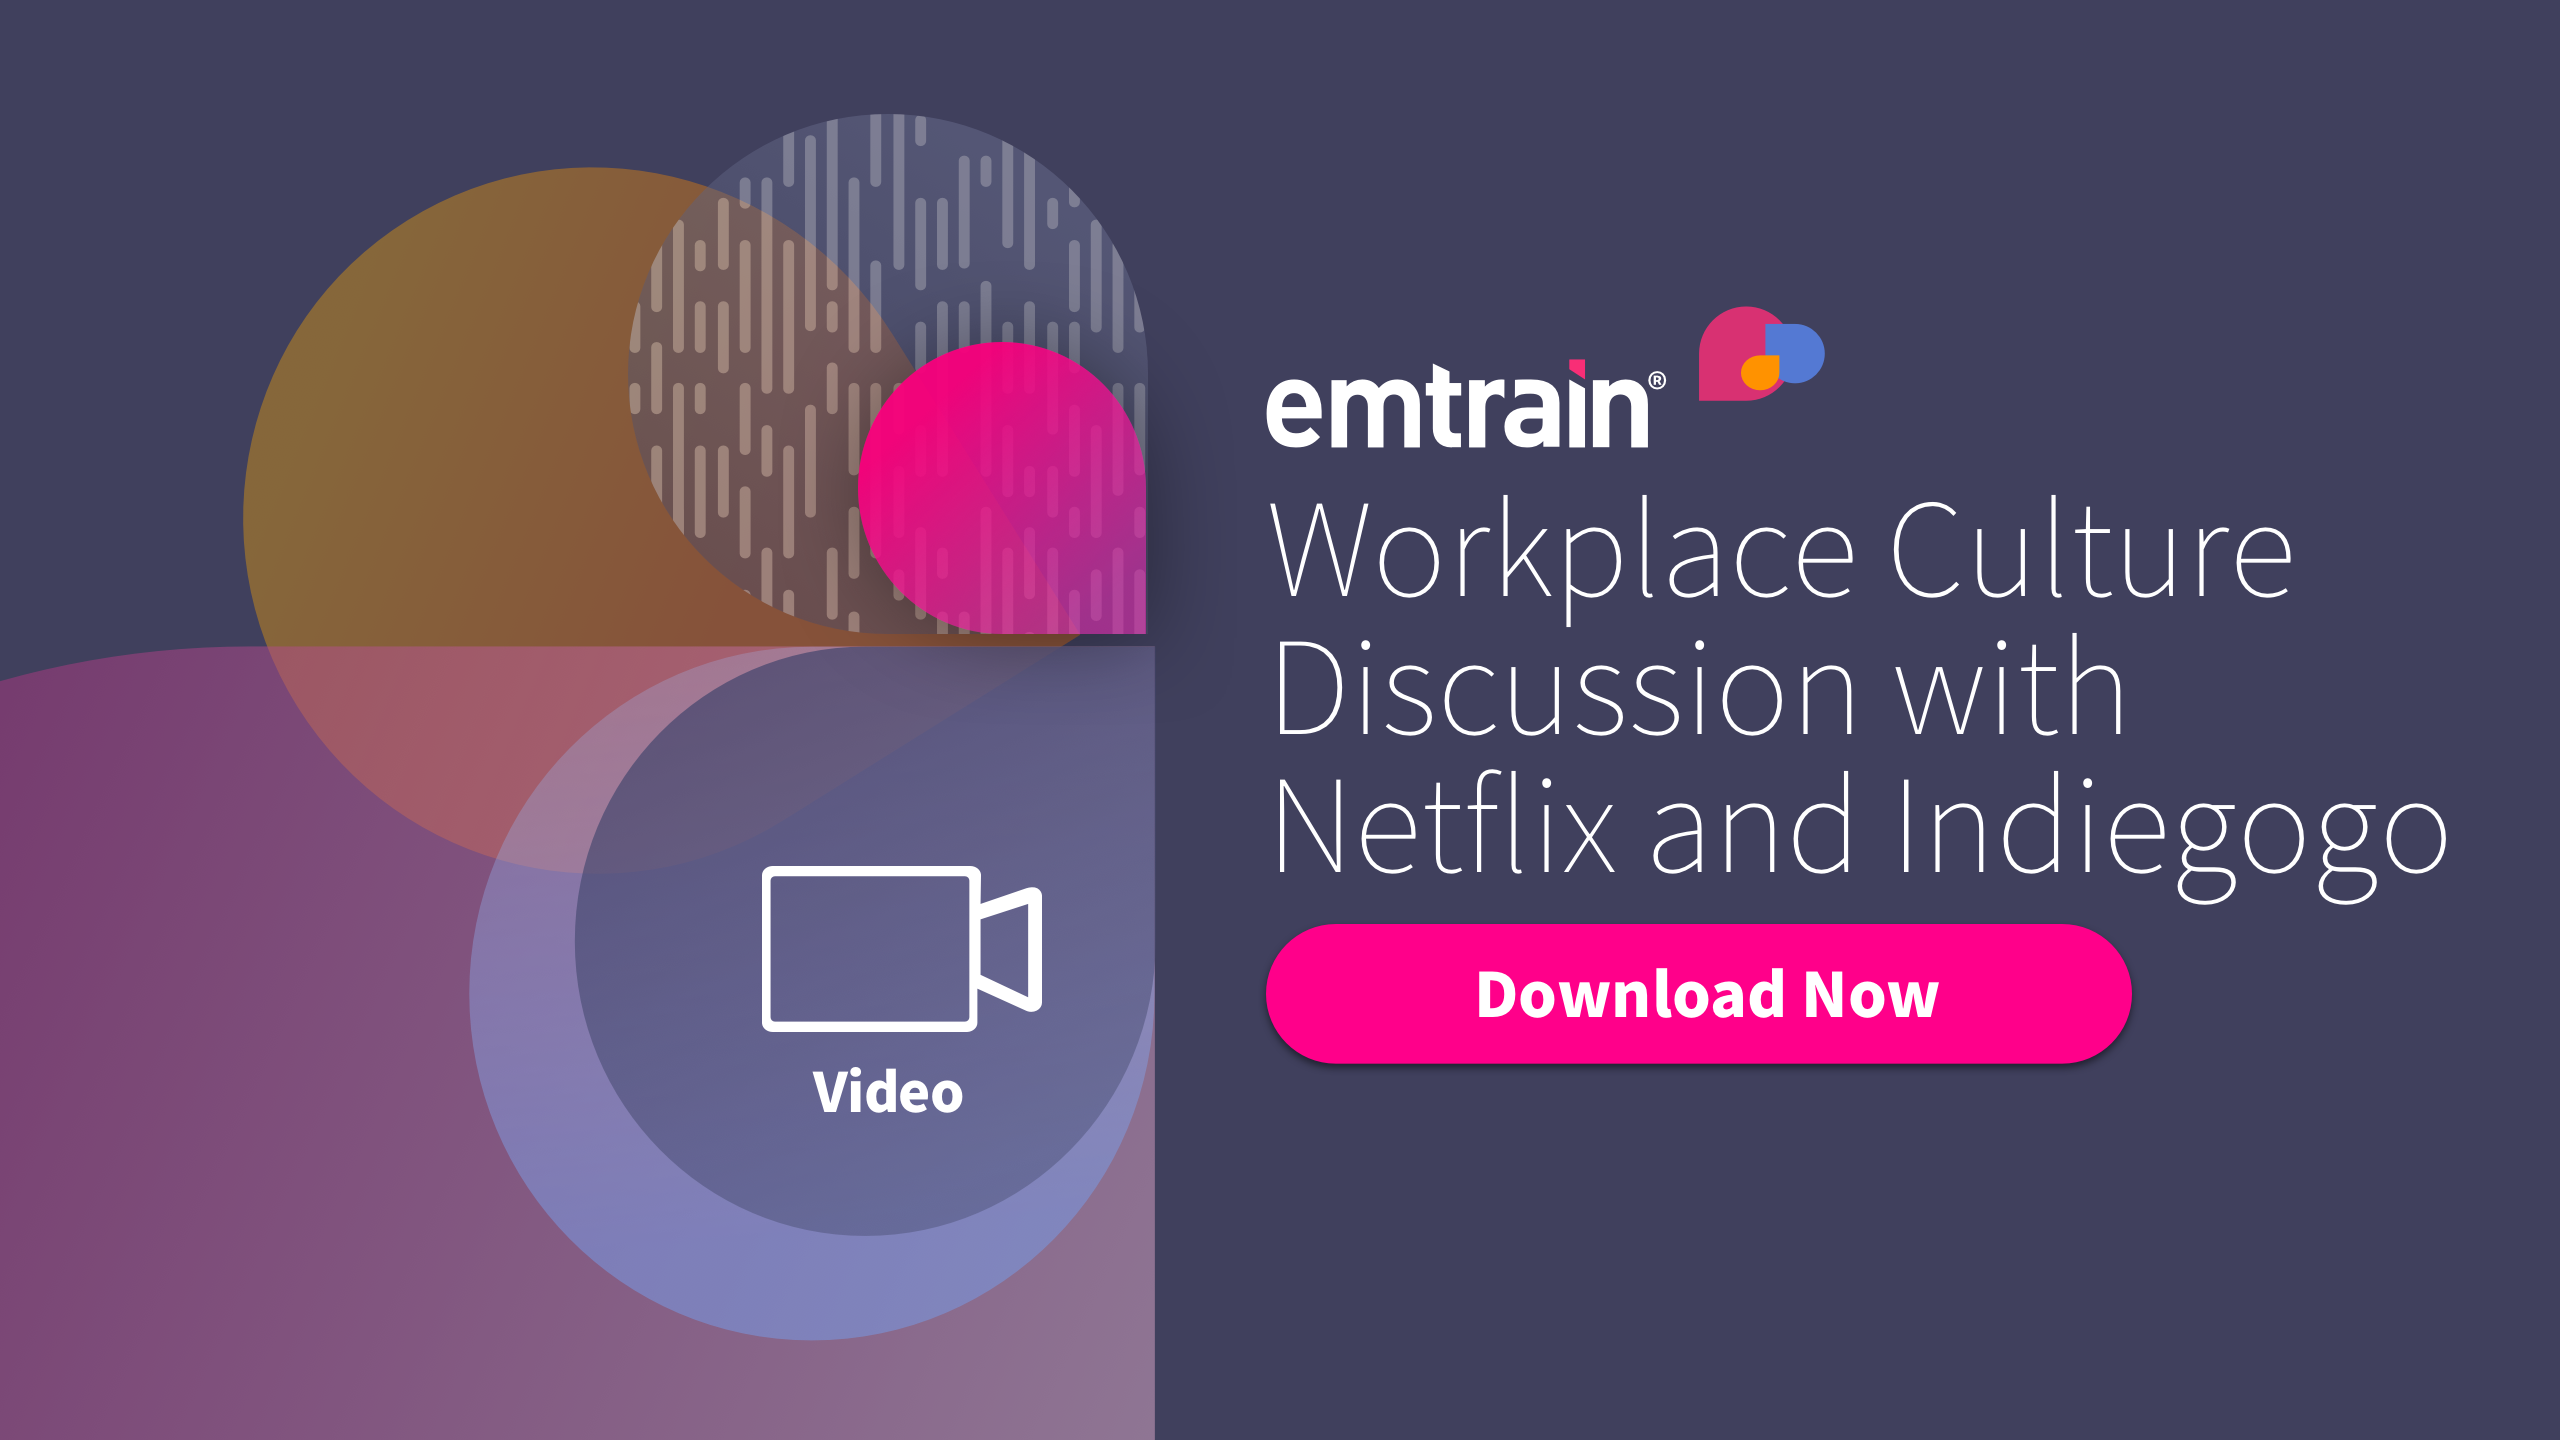 Workplace Culture Discussion with Netflix and Indiegogo